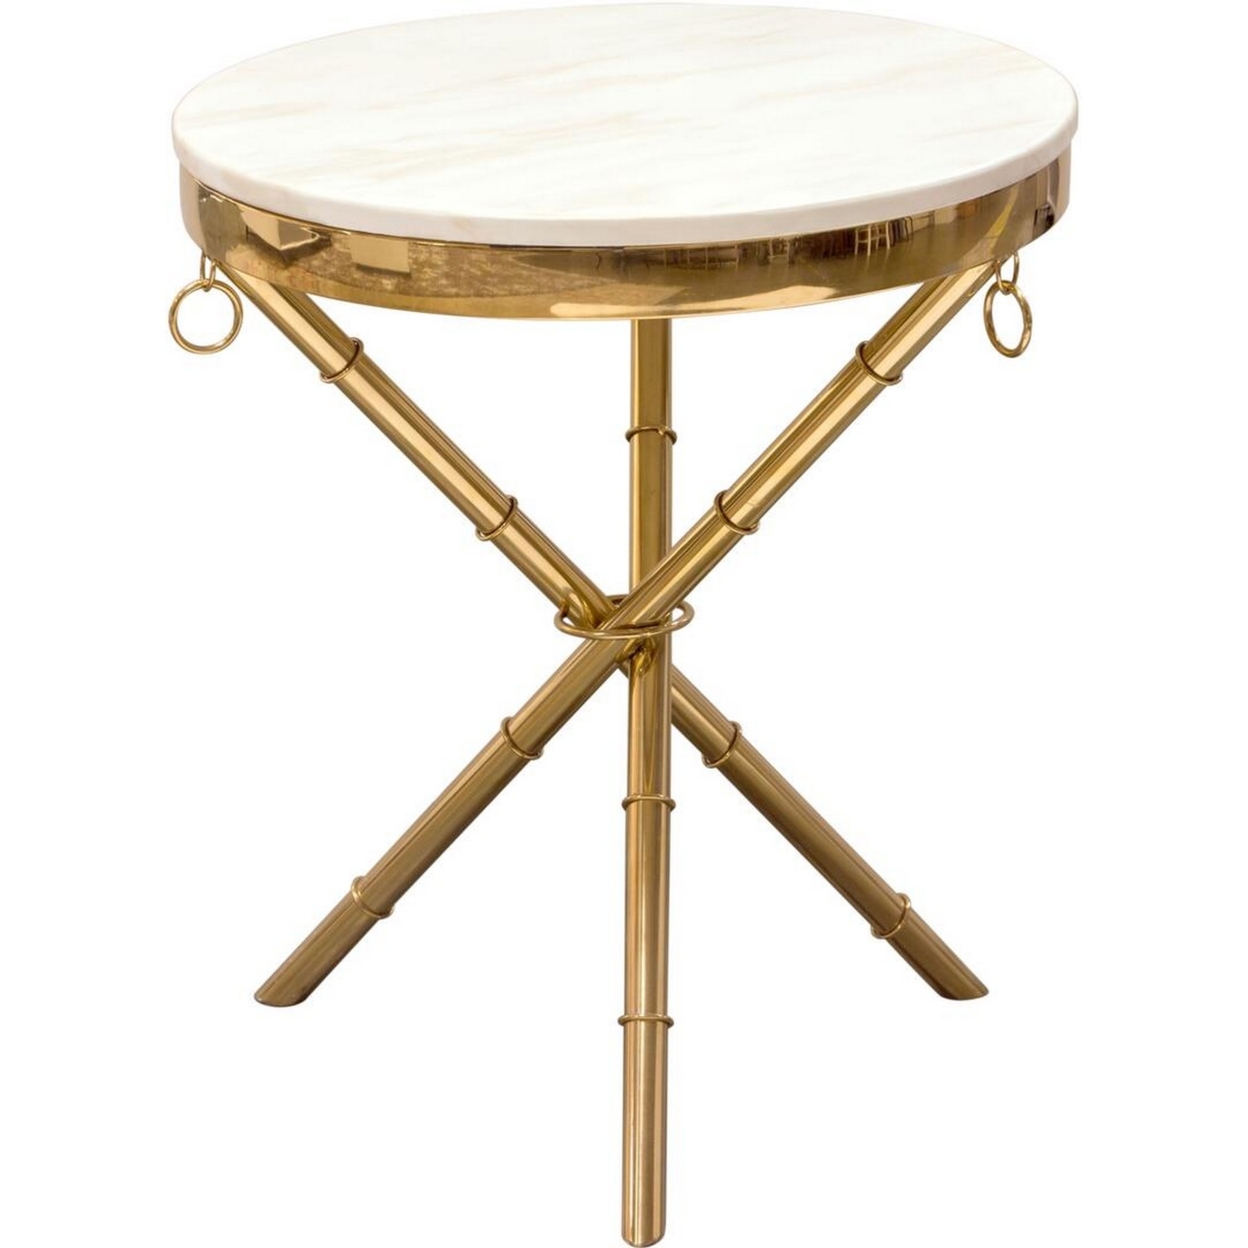 Marble Top Accent Table With Stainless Steel Crossed Legs, White And Gold- Saltoro Sherpi